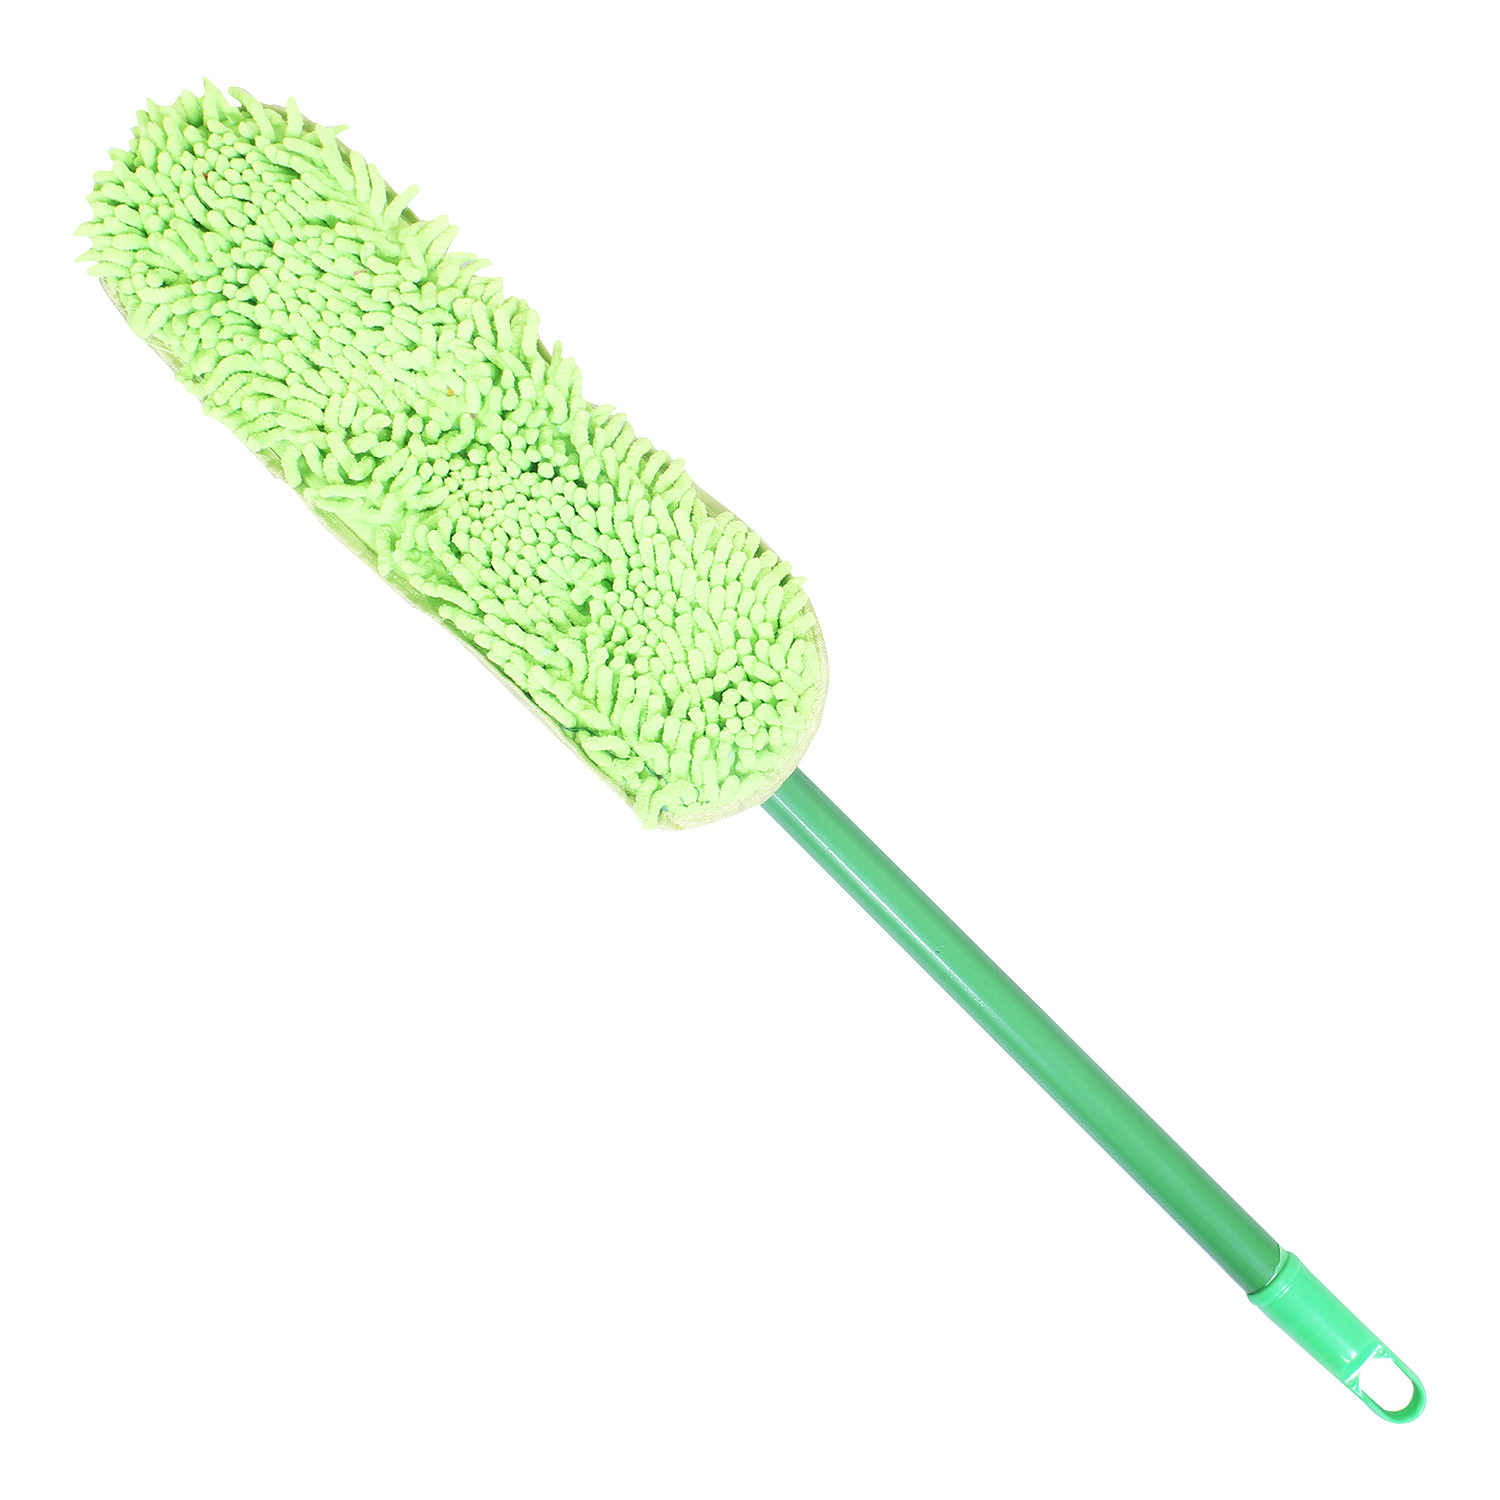 Kuber Industries Hand Duster|Microfiber Washable Cleaning Brush|Stainless Steel Detachable Handle Dusting Brush For Car|House Cleaning (Green)